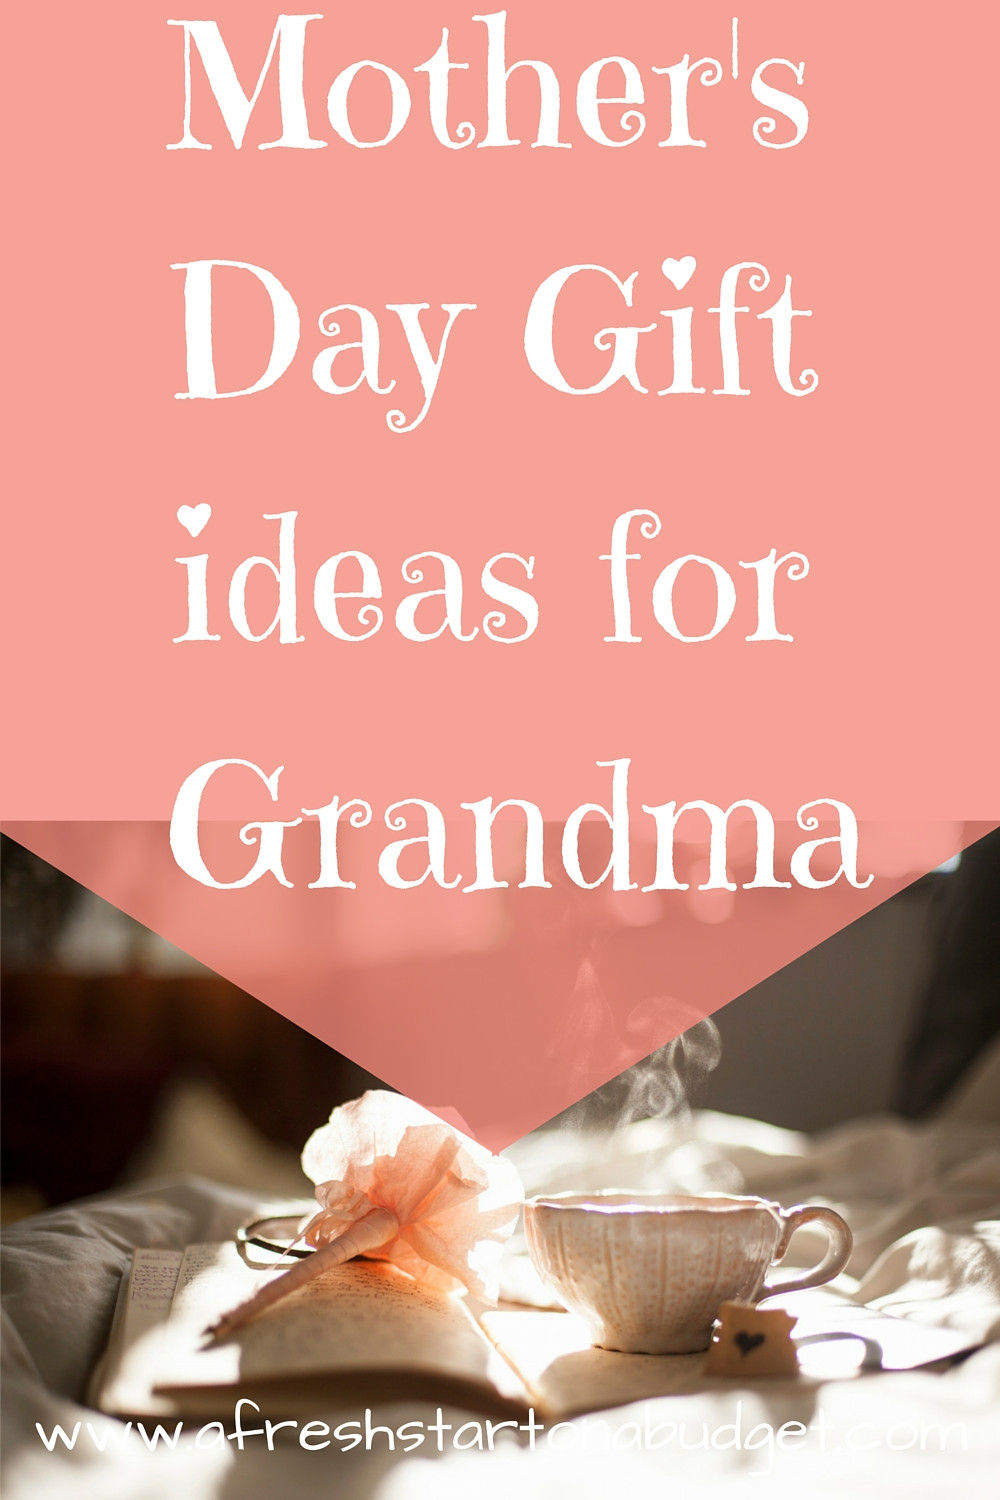 Mother's Day Gift For Grandma
 Mother s Day Gift ideas for Grandma A Fresh Start on a